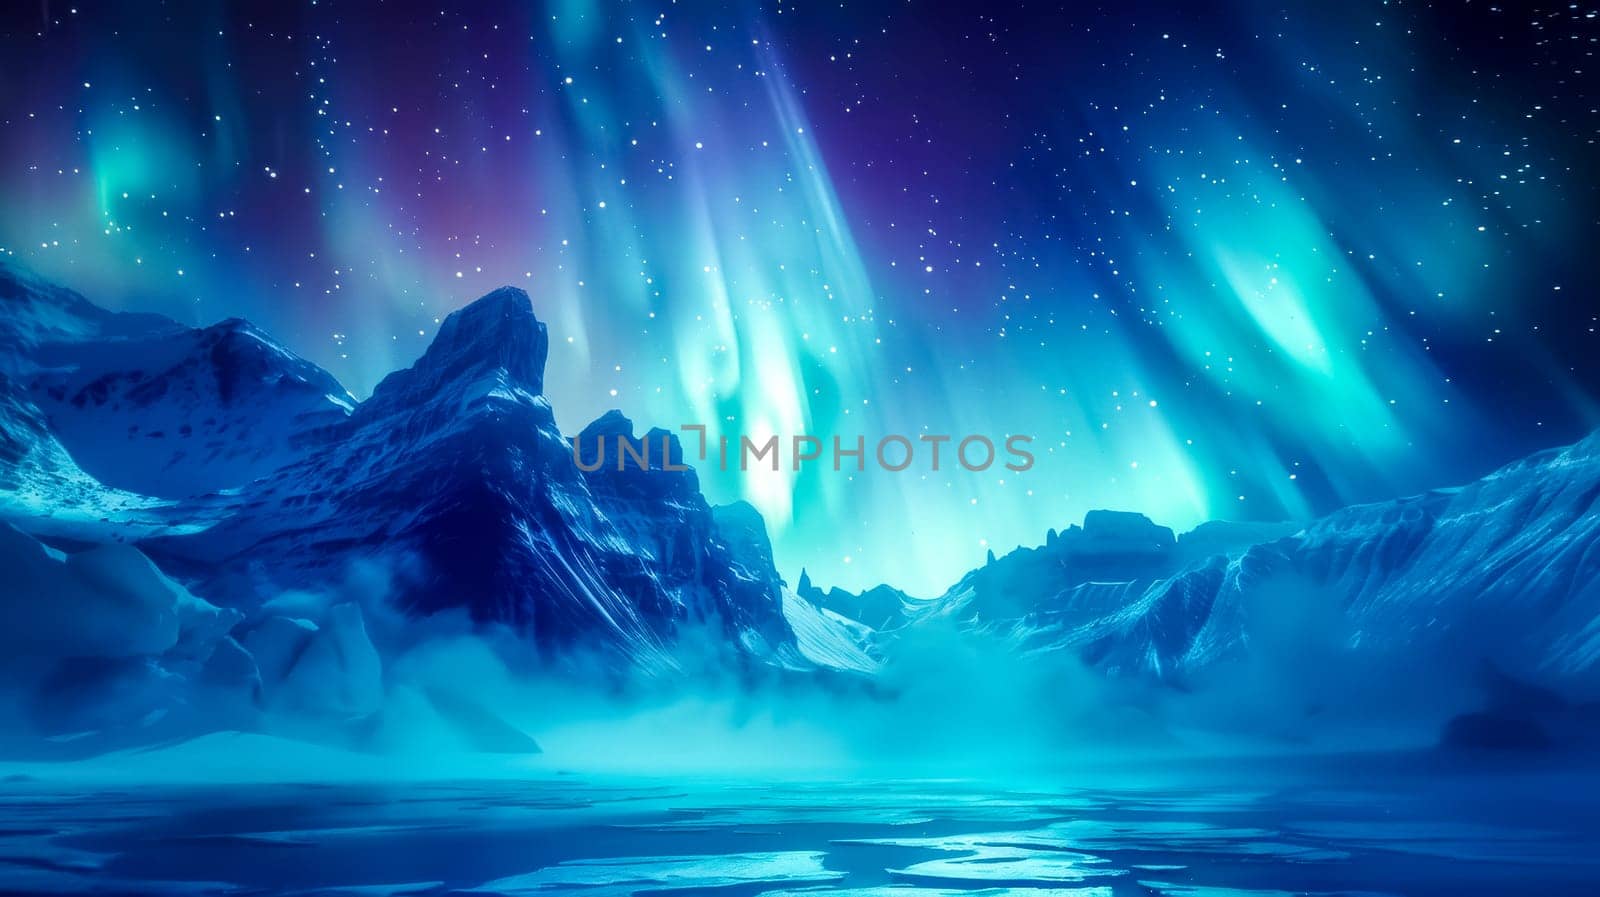 Majestic northern lights dance above a snowy mountain range and icy terrain